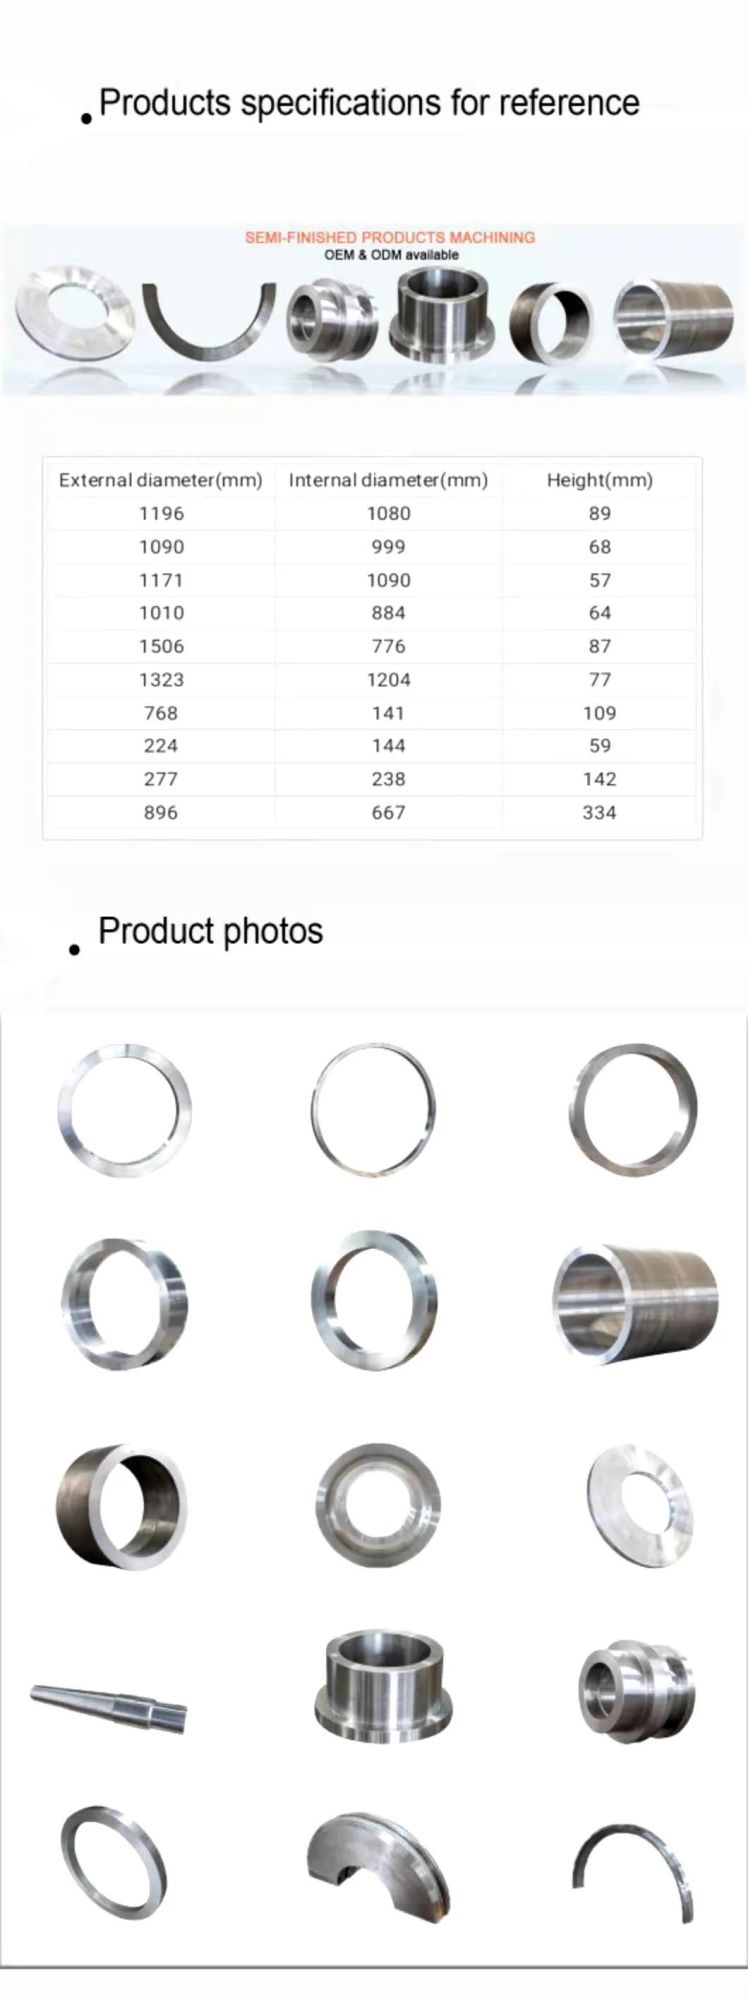 Steel Rolling Knife, Hot Forged Parts for Petroleum, Metallurgy Industries